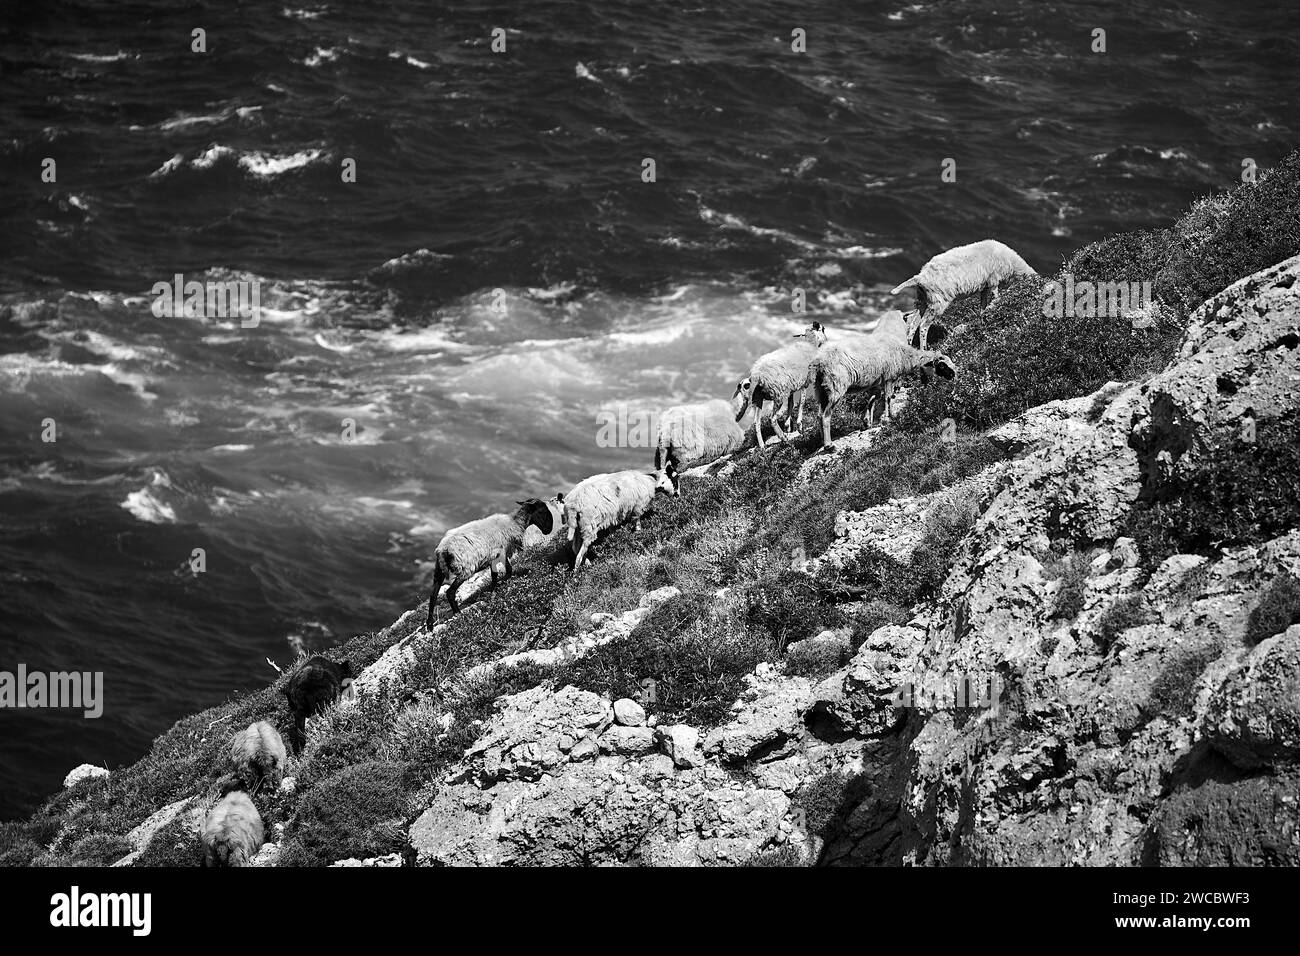 A herd of sheep grazing on a rocky mountainside by the sea on the island of Crete, Grecja,  monochrome Stock Photo